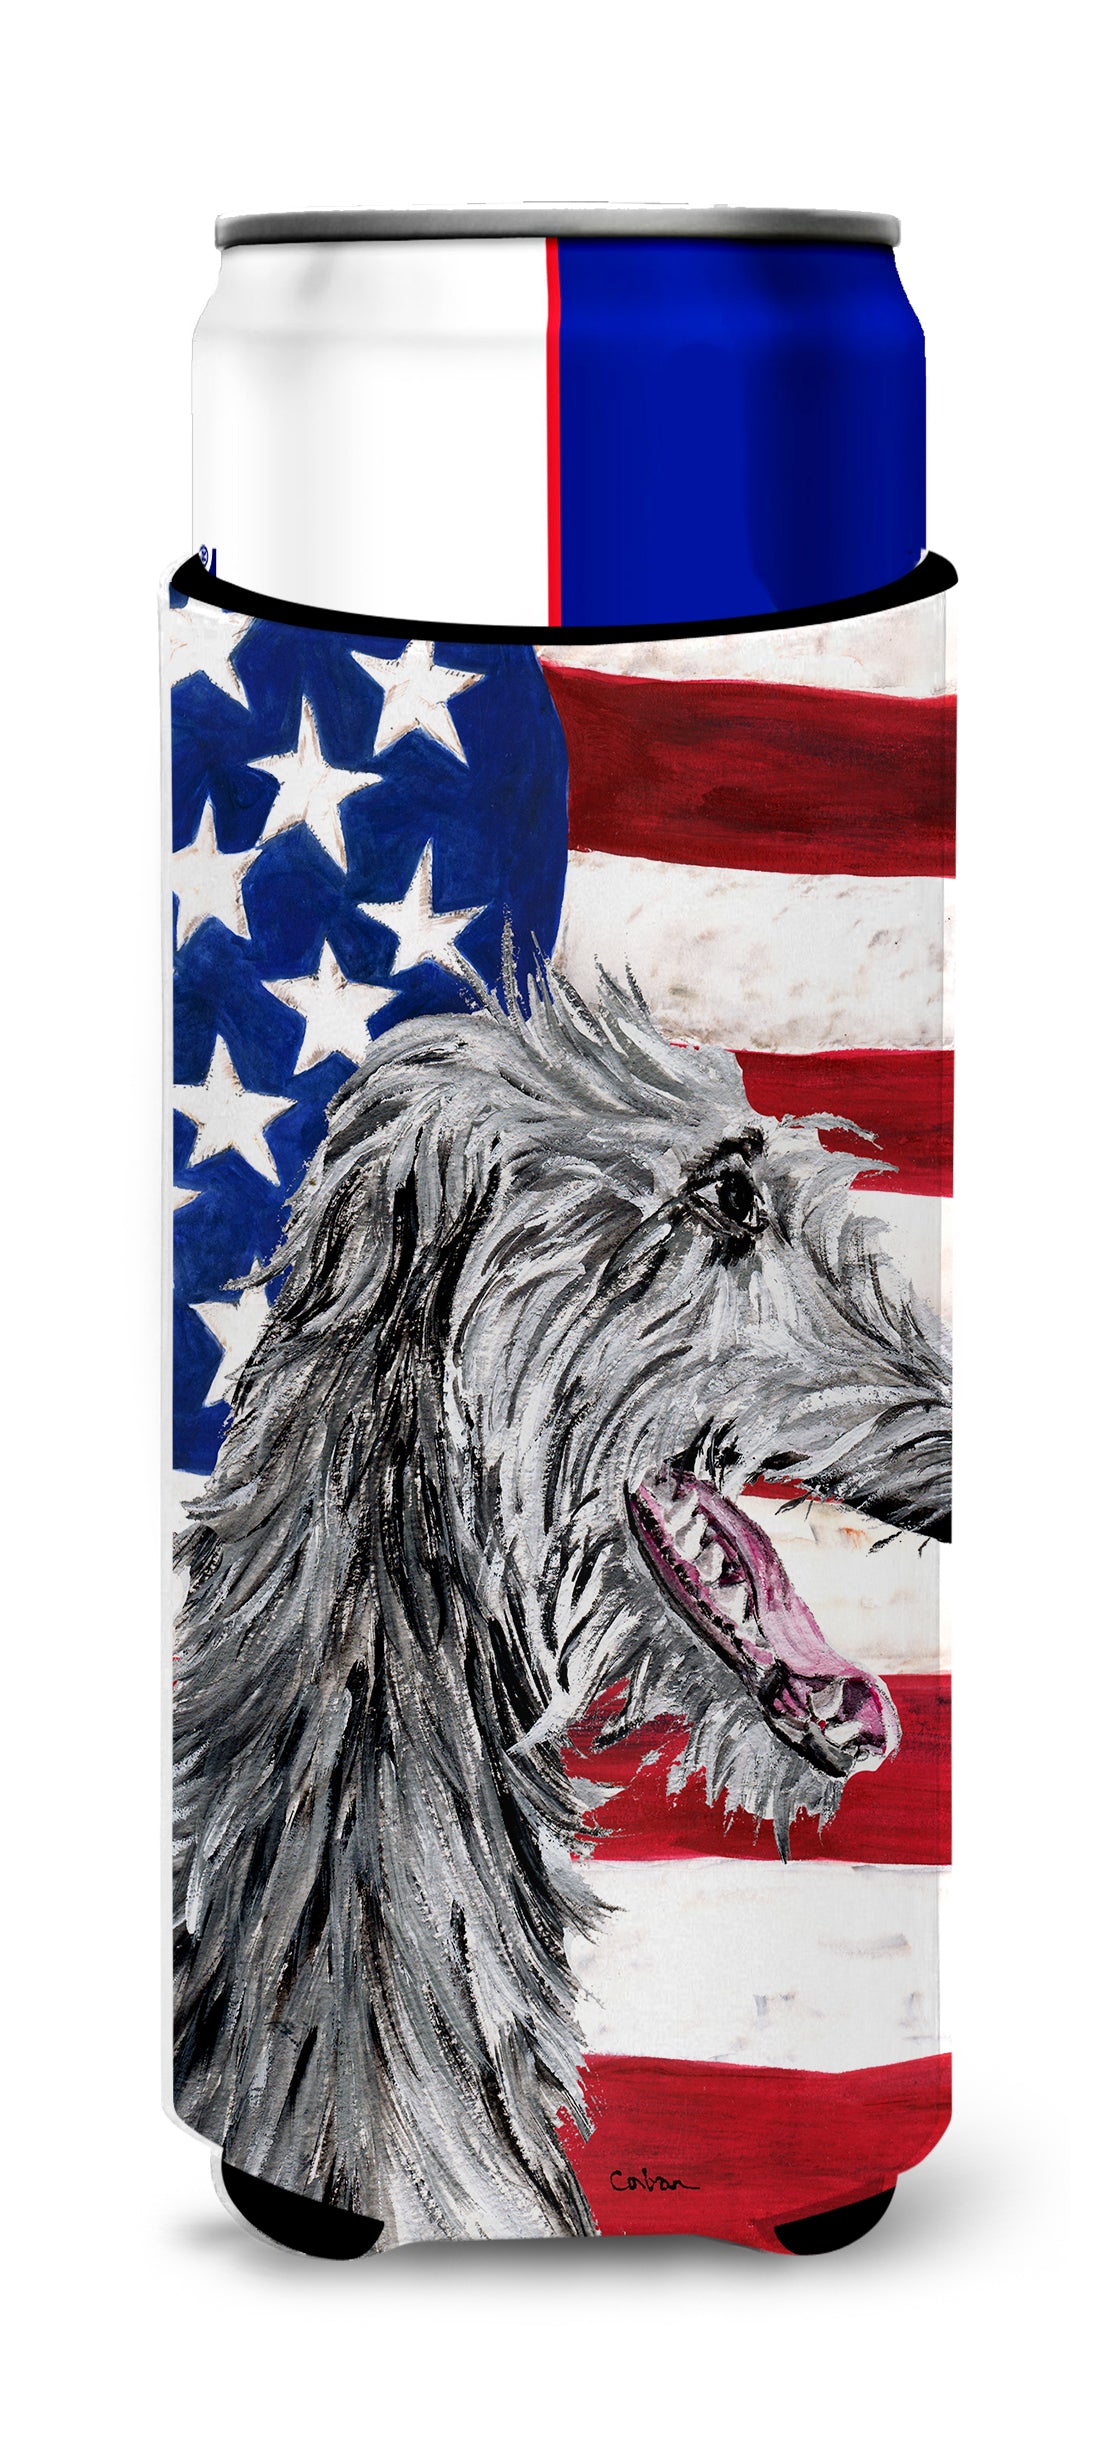 Scottish Deerhound with American Flag USA Ultra Beverage Insulators for slim cans SC9645MUK